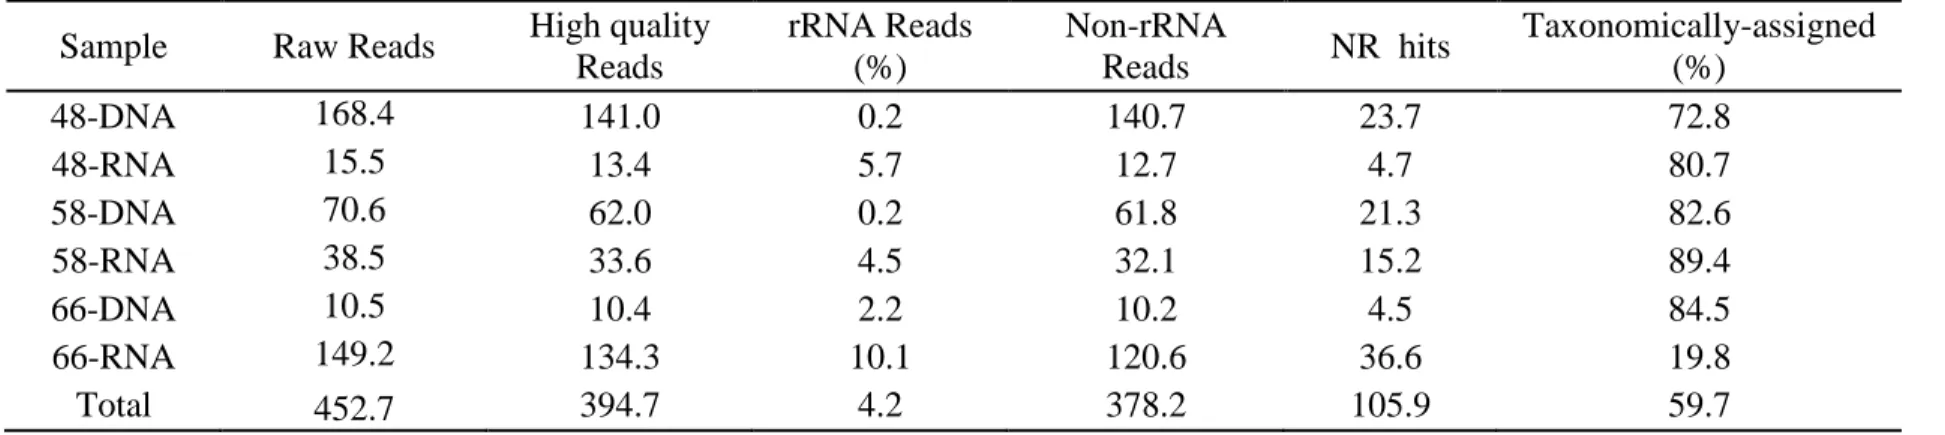 Table  1.  Results  of  high  throughput  sequencing:  raw  reads,  quality  reads,  percent  of  reads  corresponding  to  ribosomal  RNA,  Non  ribosomal genes, non-redundant hits and percent of the latter that could be taxonomically assigned